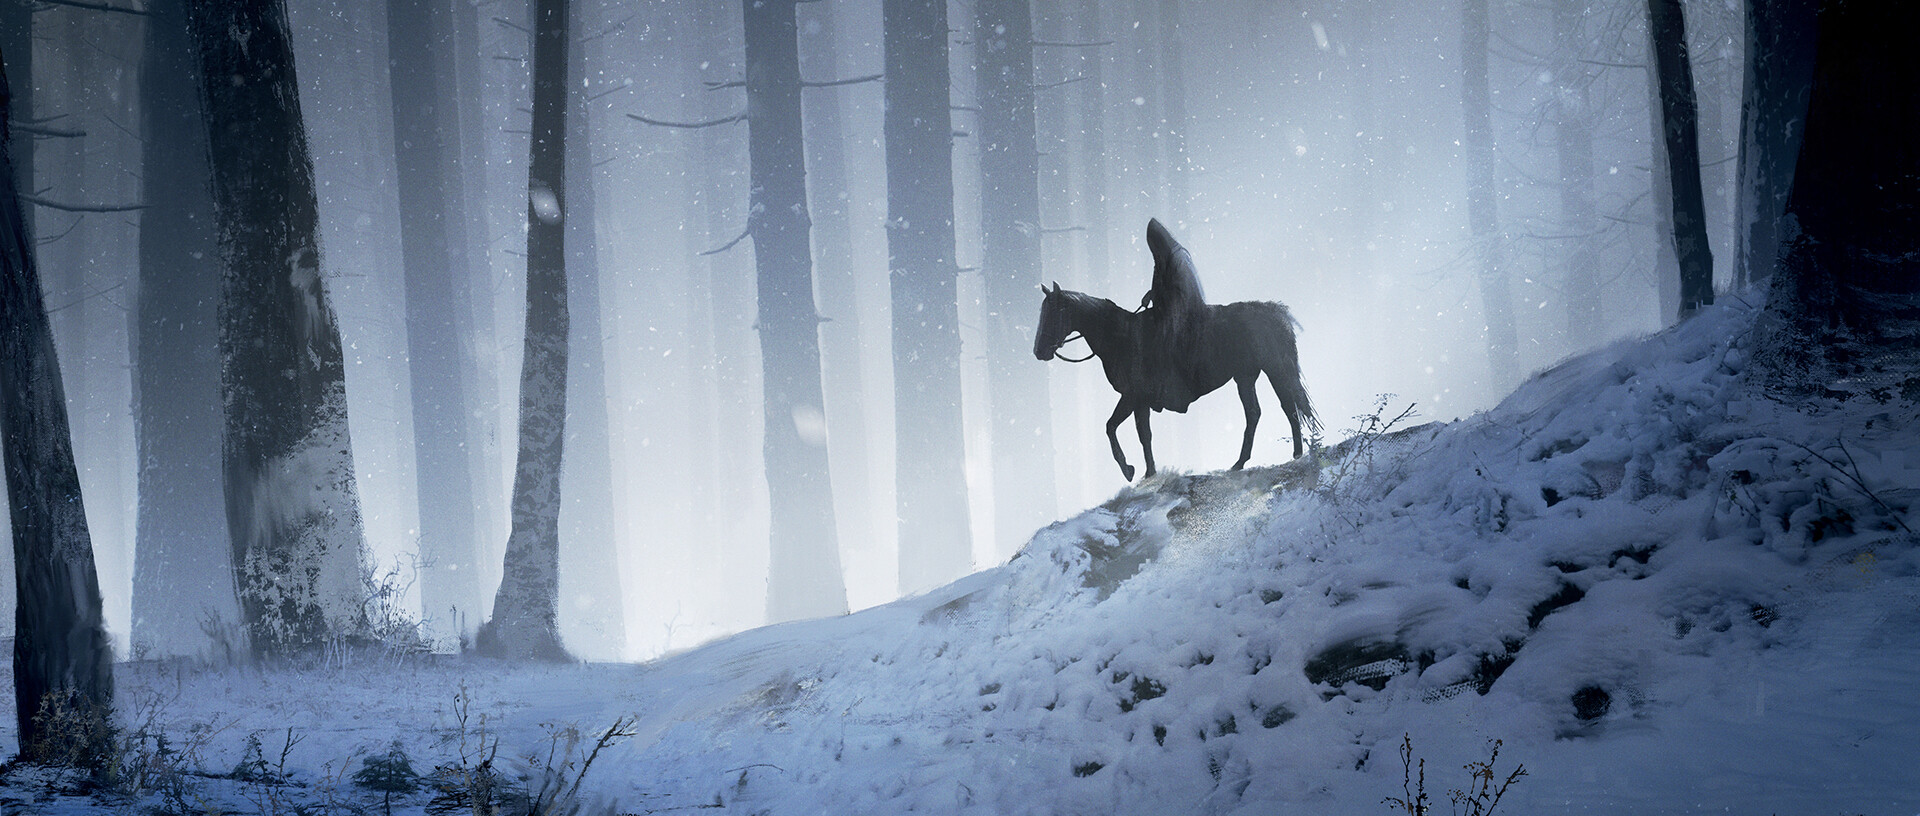 Horse Riding Snow Forest Artwork Digital Painting 1920x816